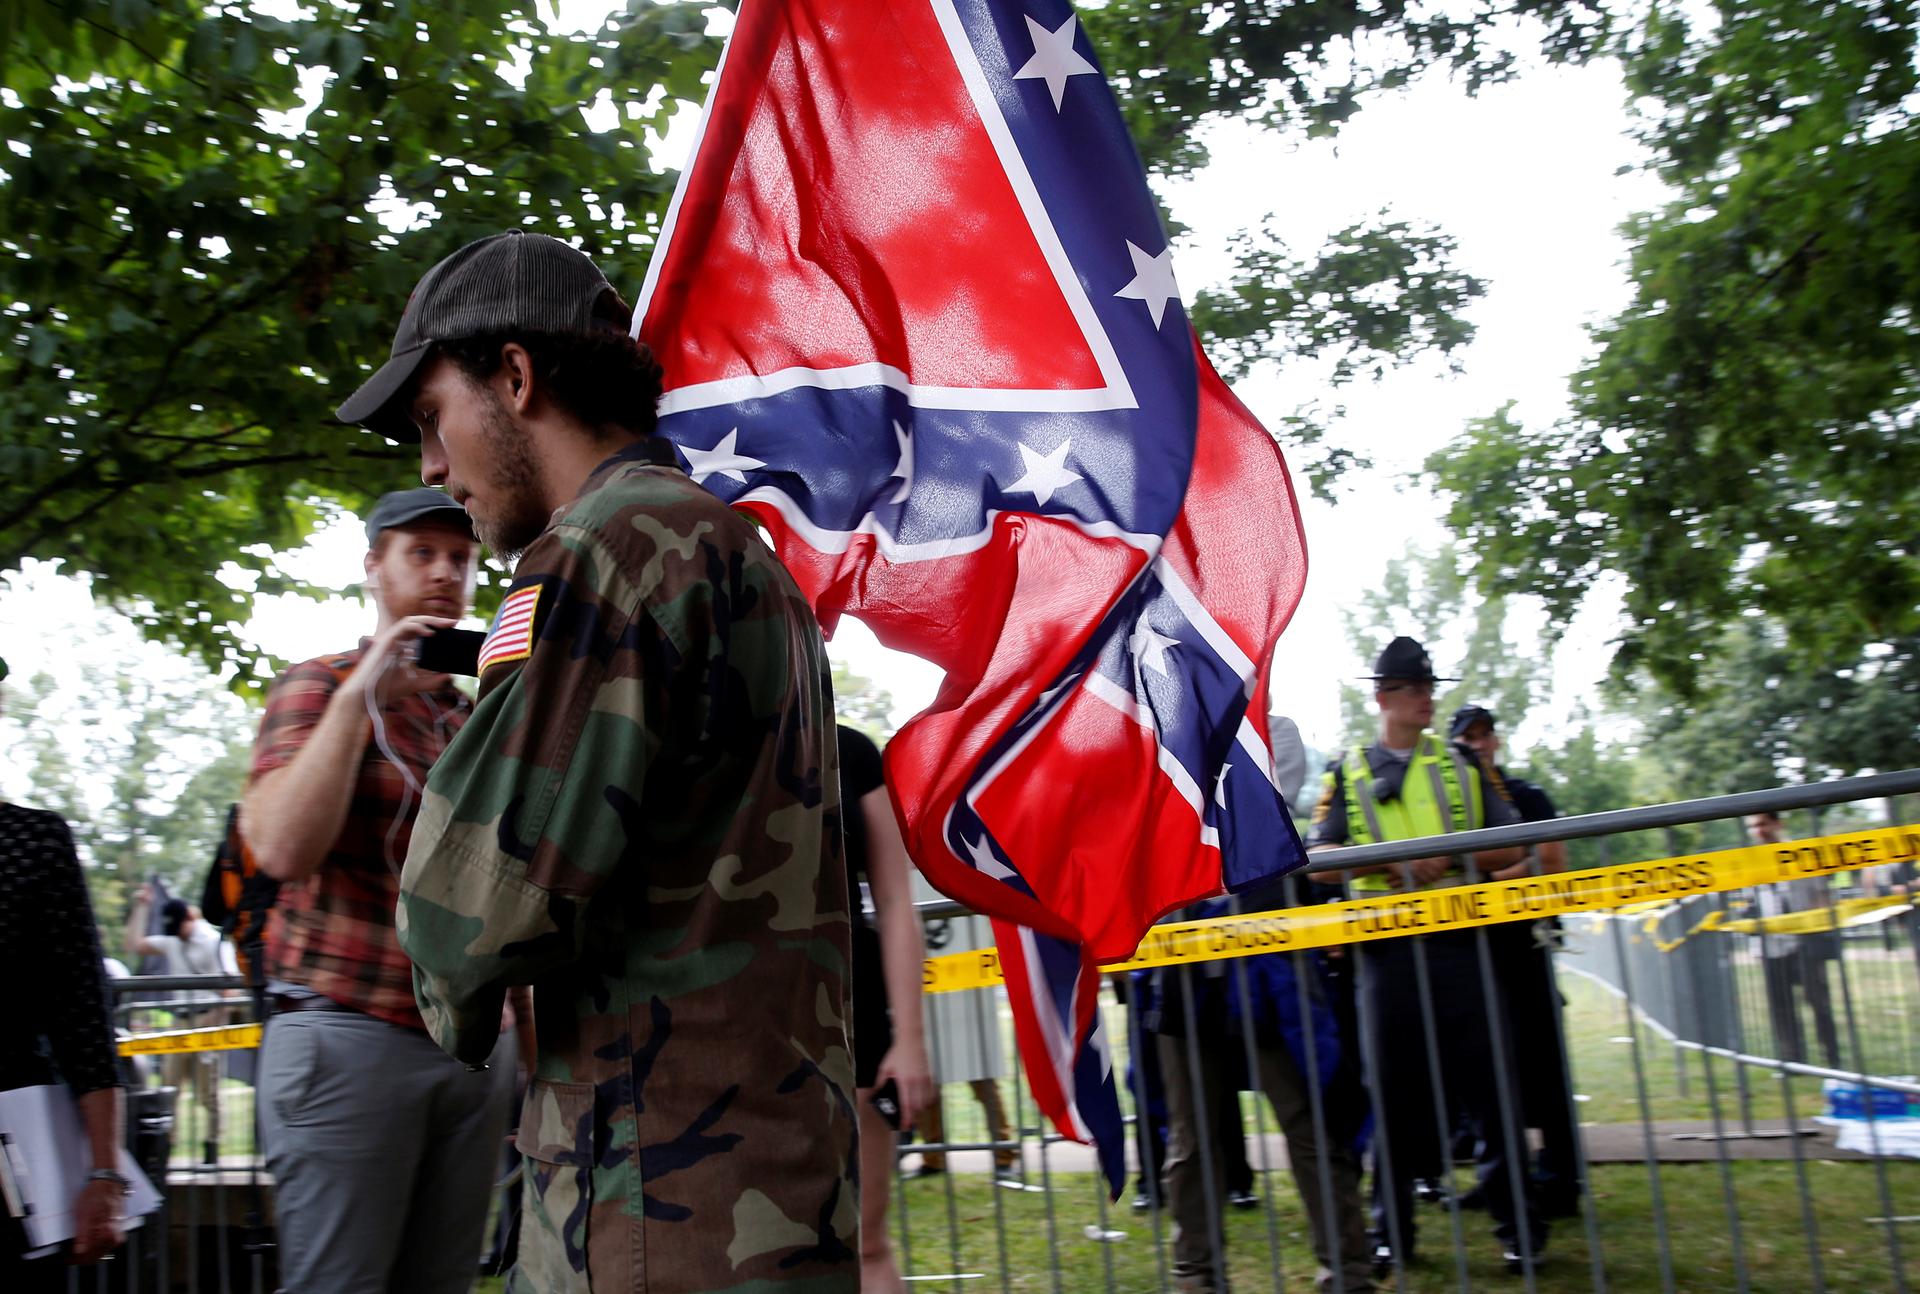 A white nationalist carries the Confederate flag as he arrives for a rally in Charlottesville, Virginia, US, August 12, 2017.